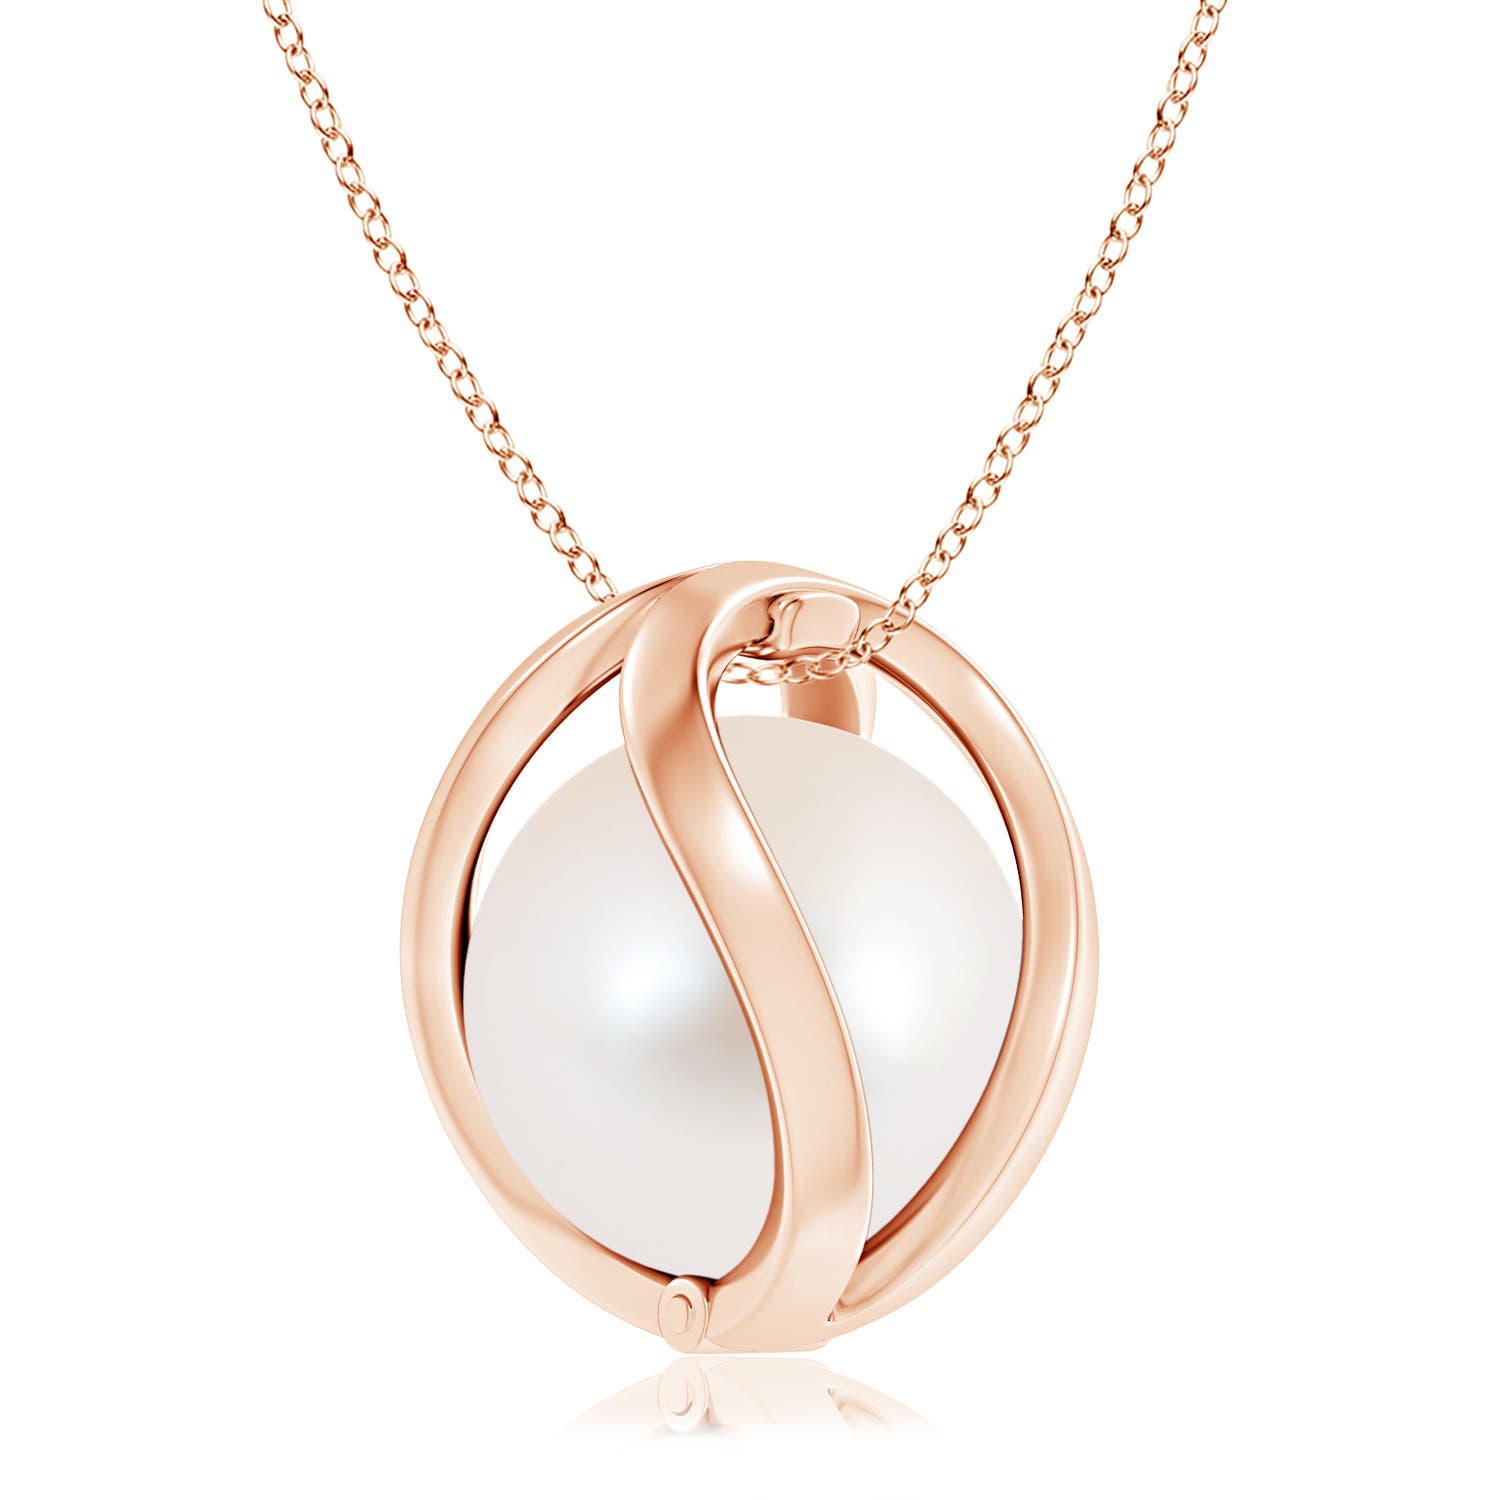 Buy Minimalist Jewelry Rose Gold Pearl Cage Basket Heart Shape Online in  India - Etsy